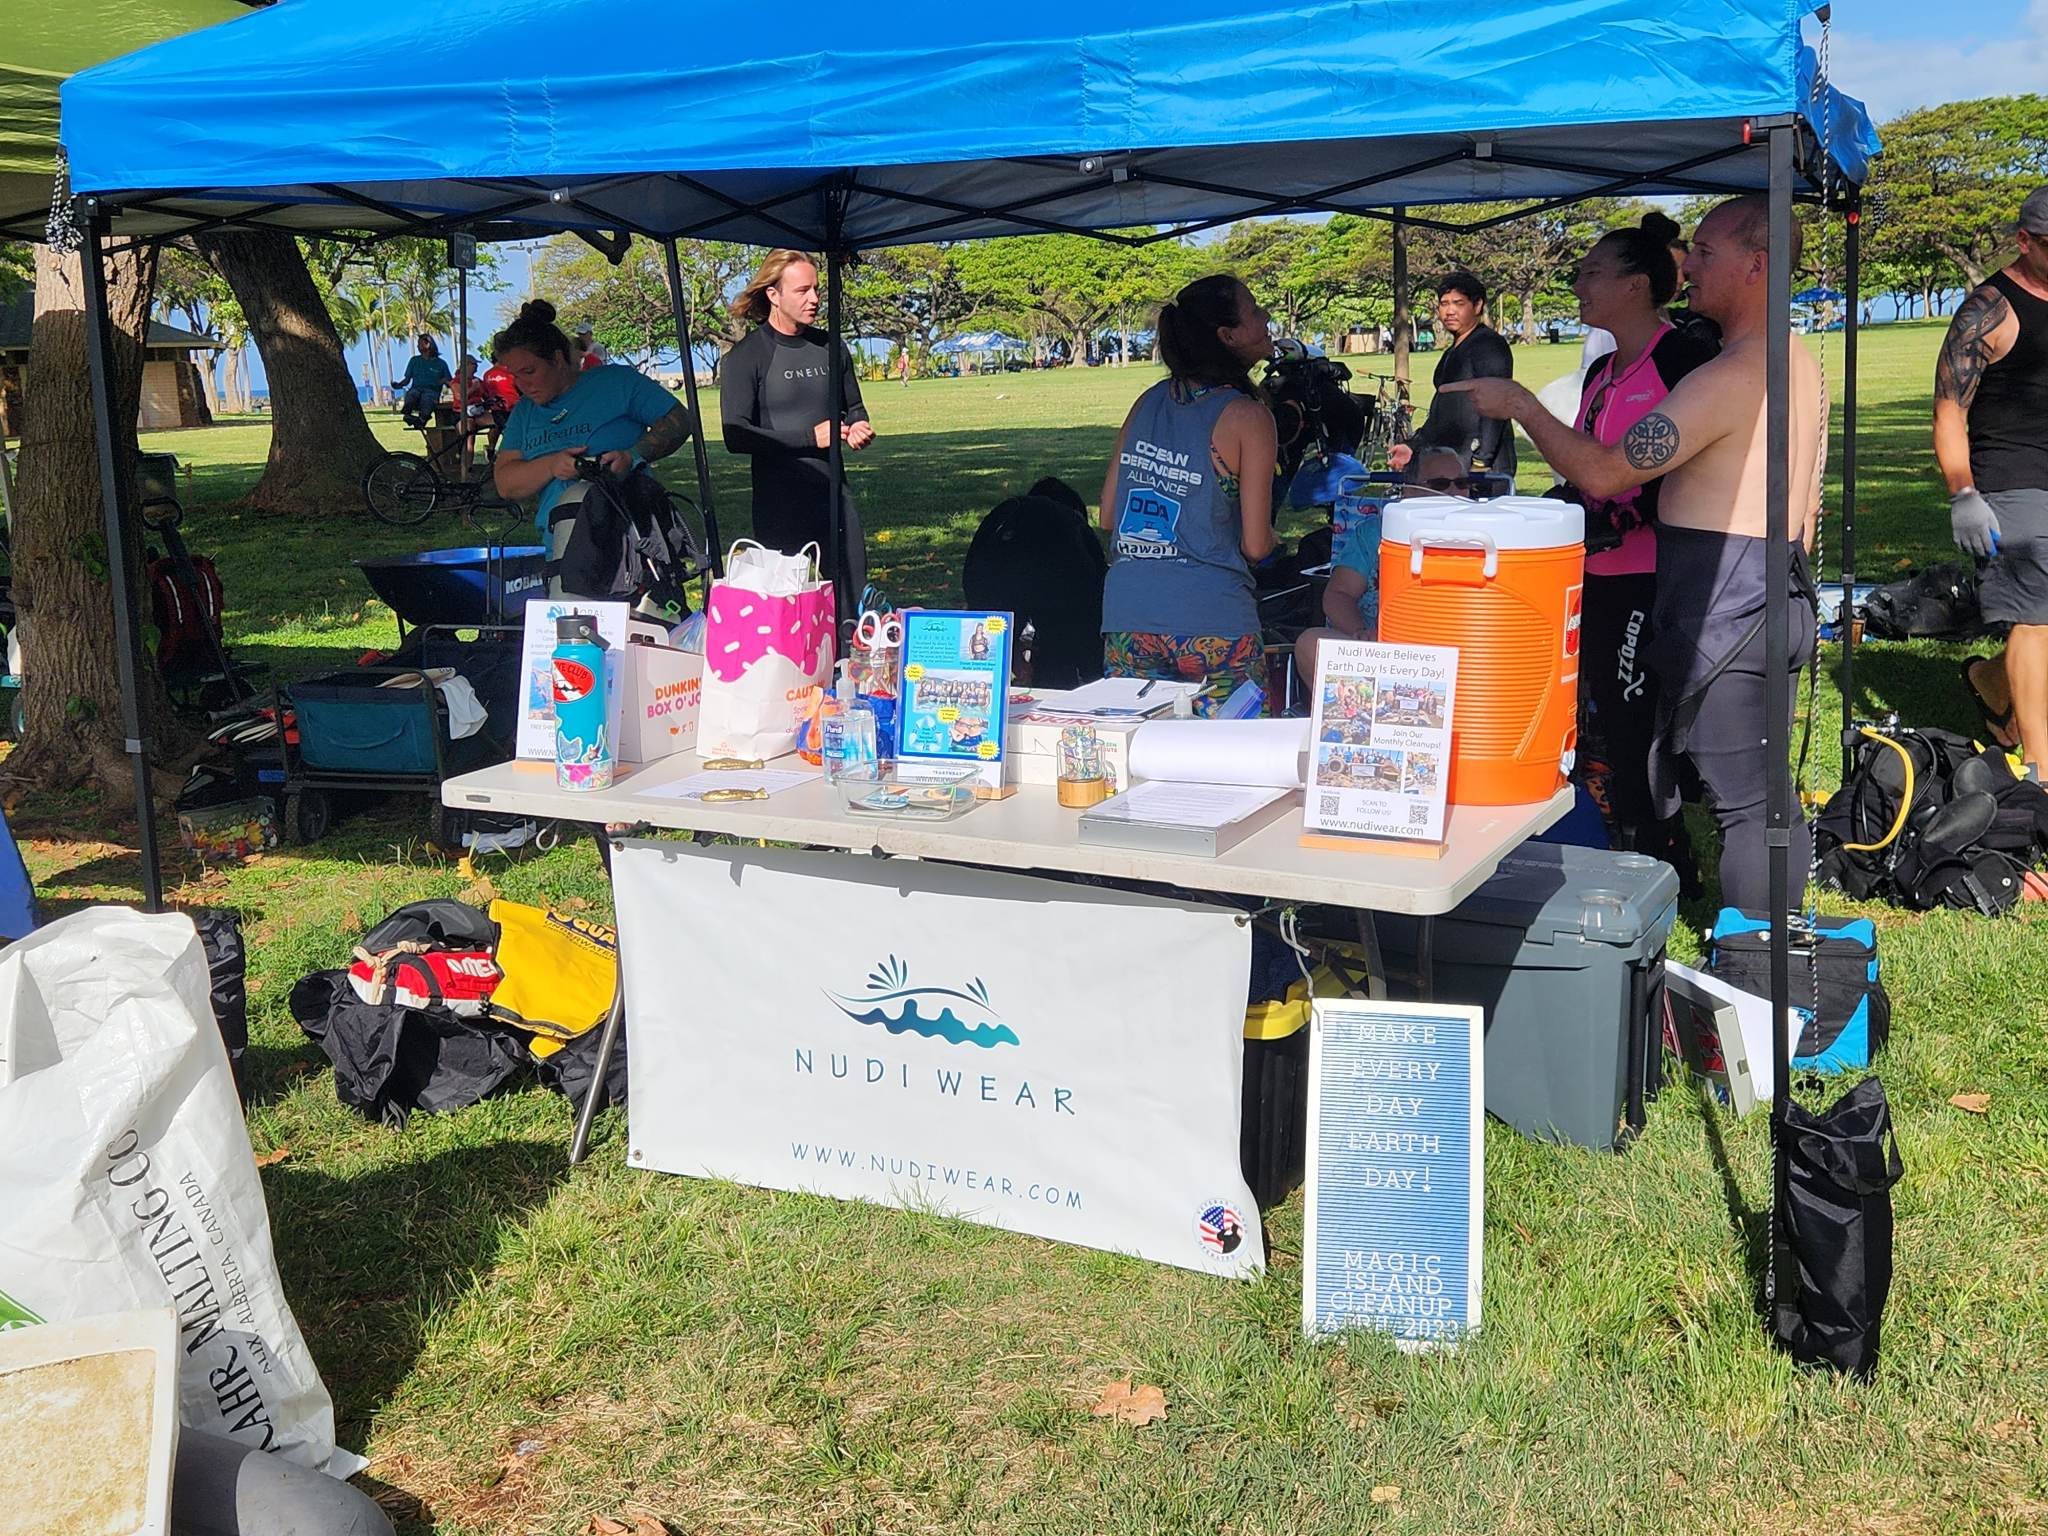 Nudi Wear booth at Earth Day event at Magic Island